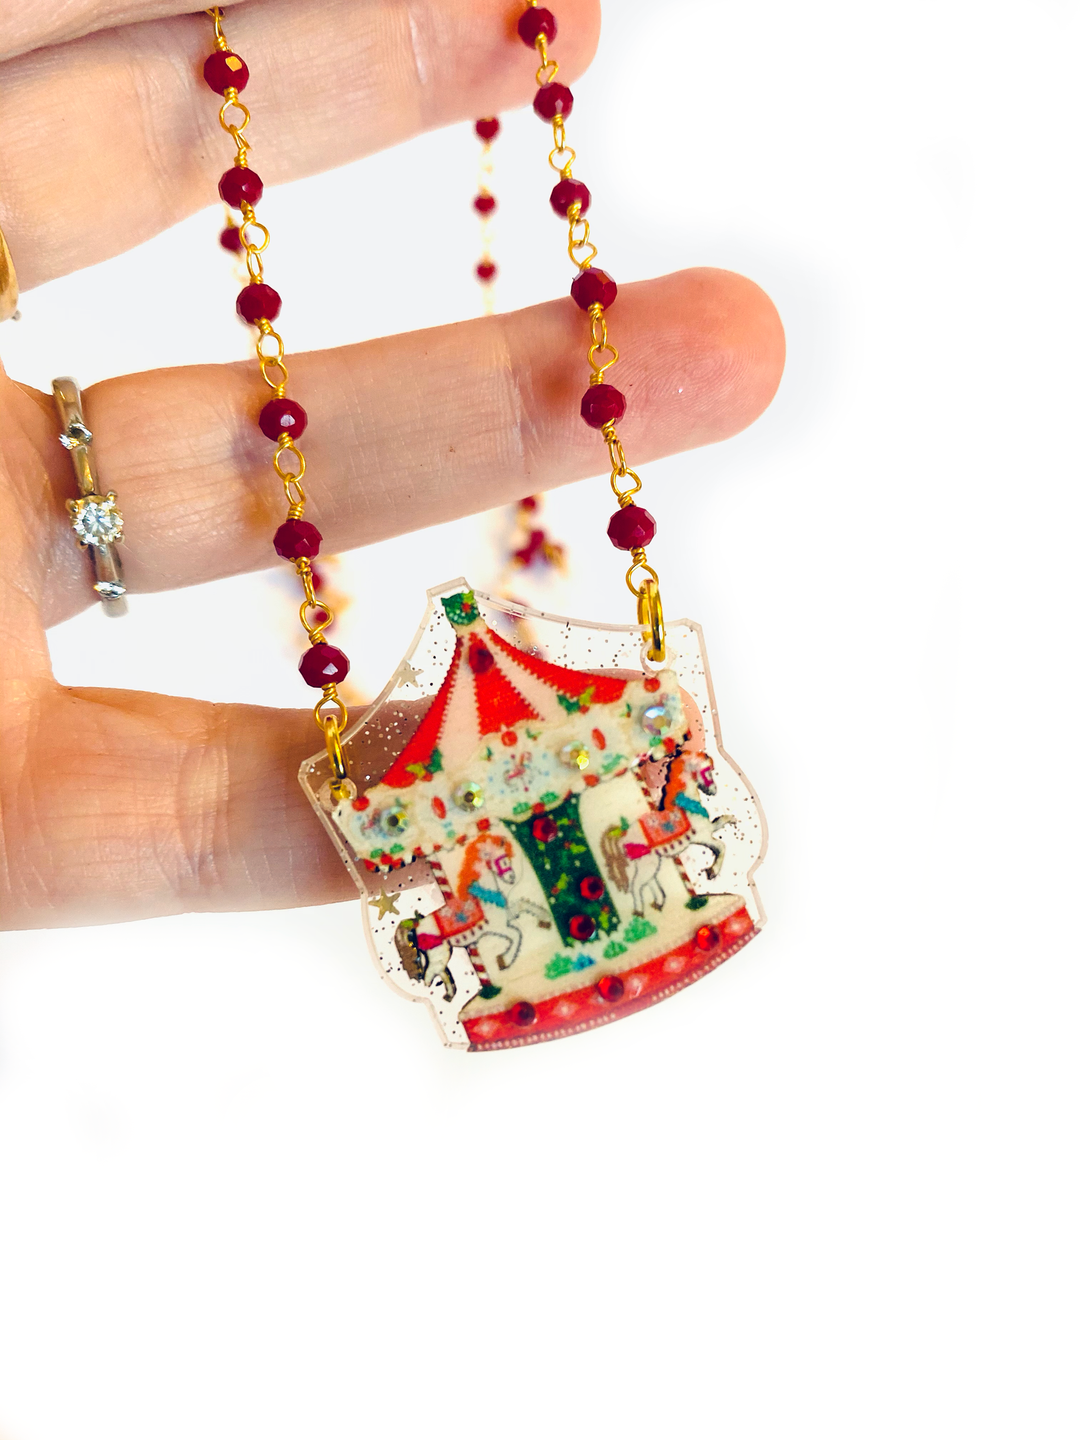 Christmas Carousel Necklace by Rosie Rose Parker